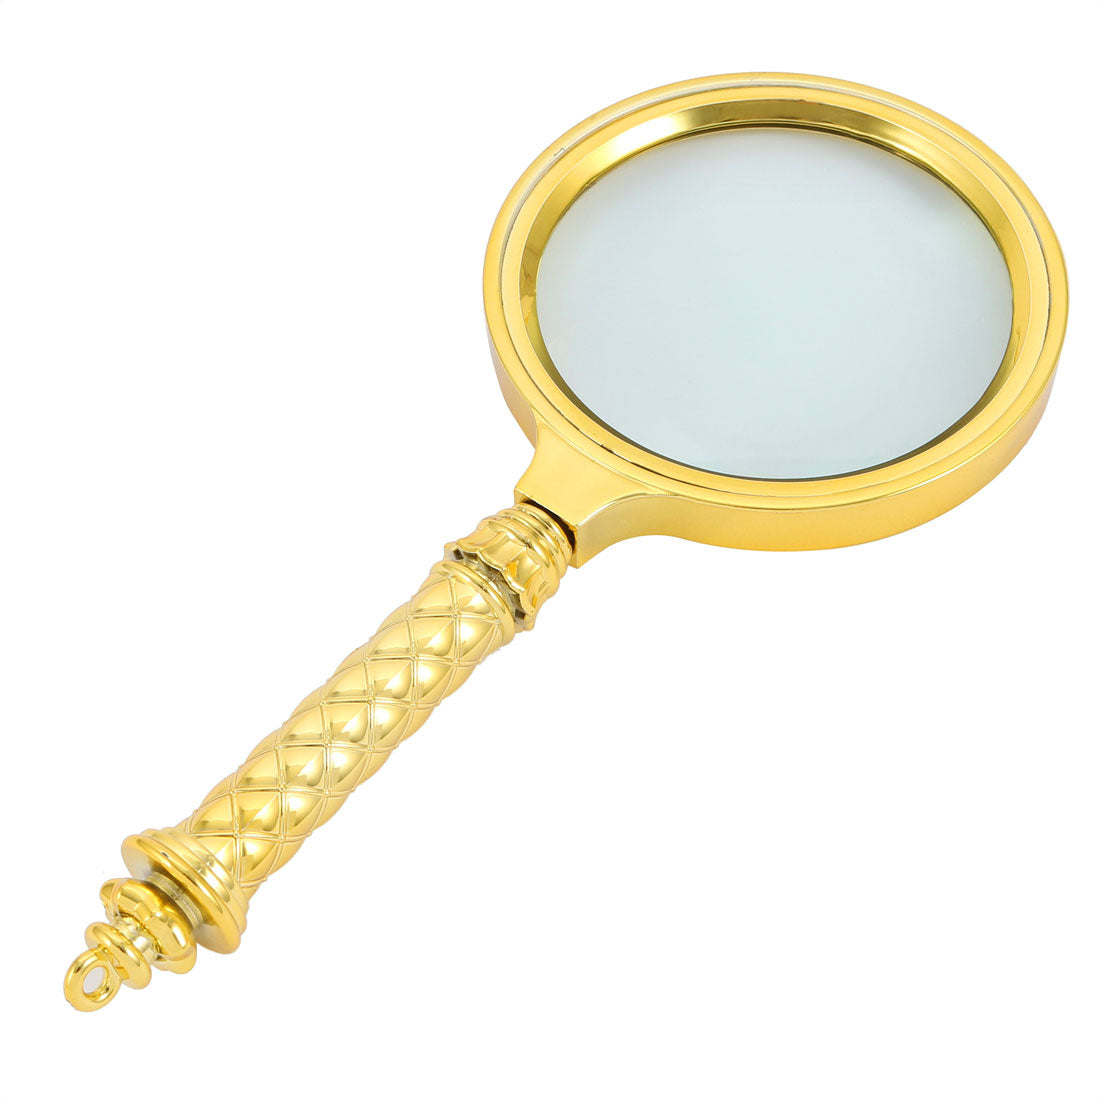 uxcell Uxcell Handheld 10X Magnifying Glass High Definition Illuminated Magnifier